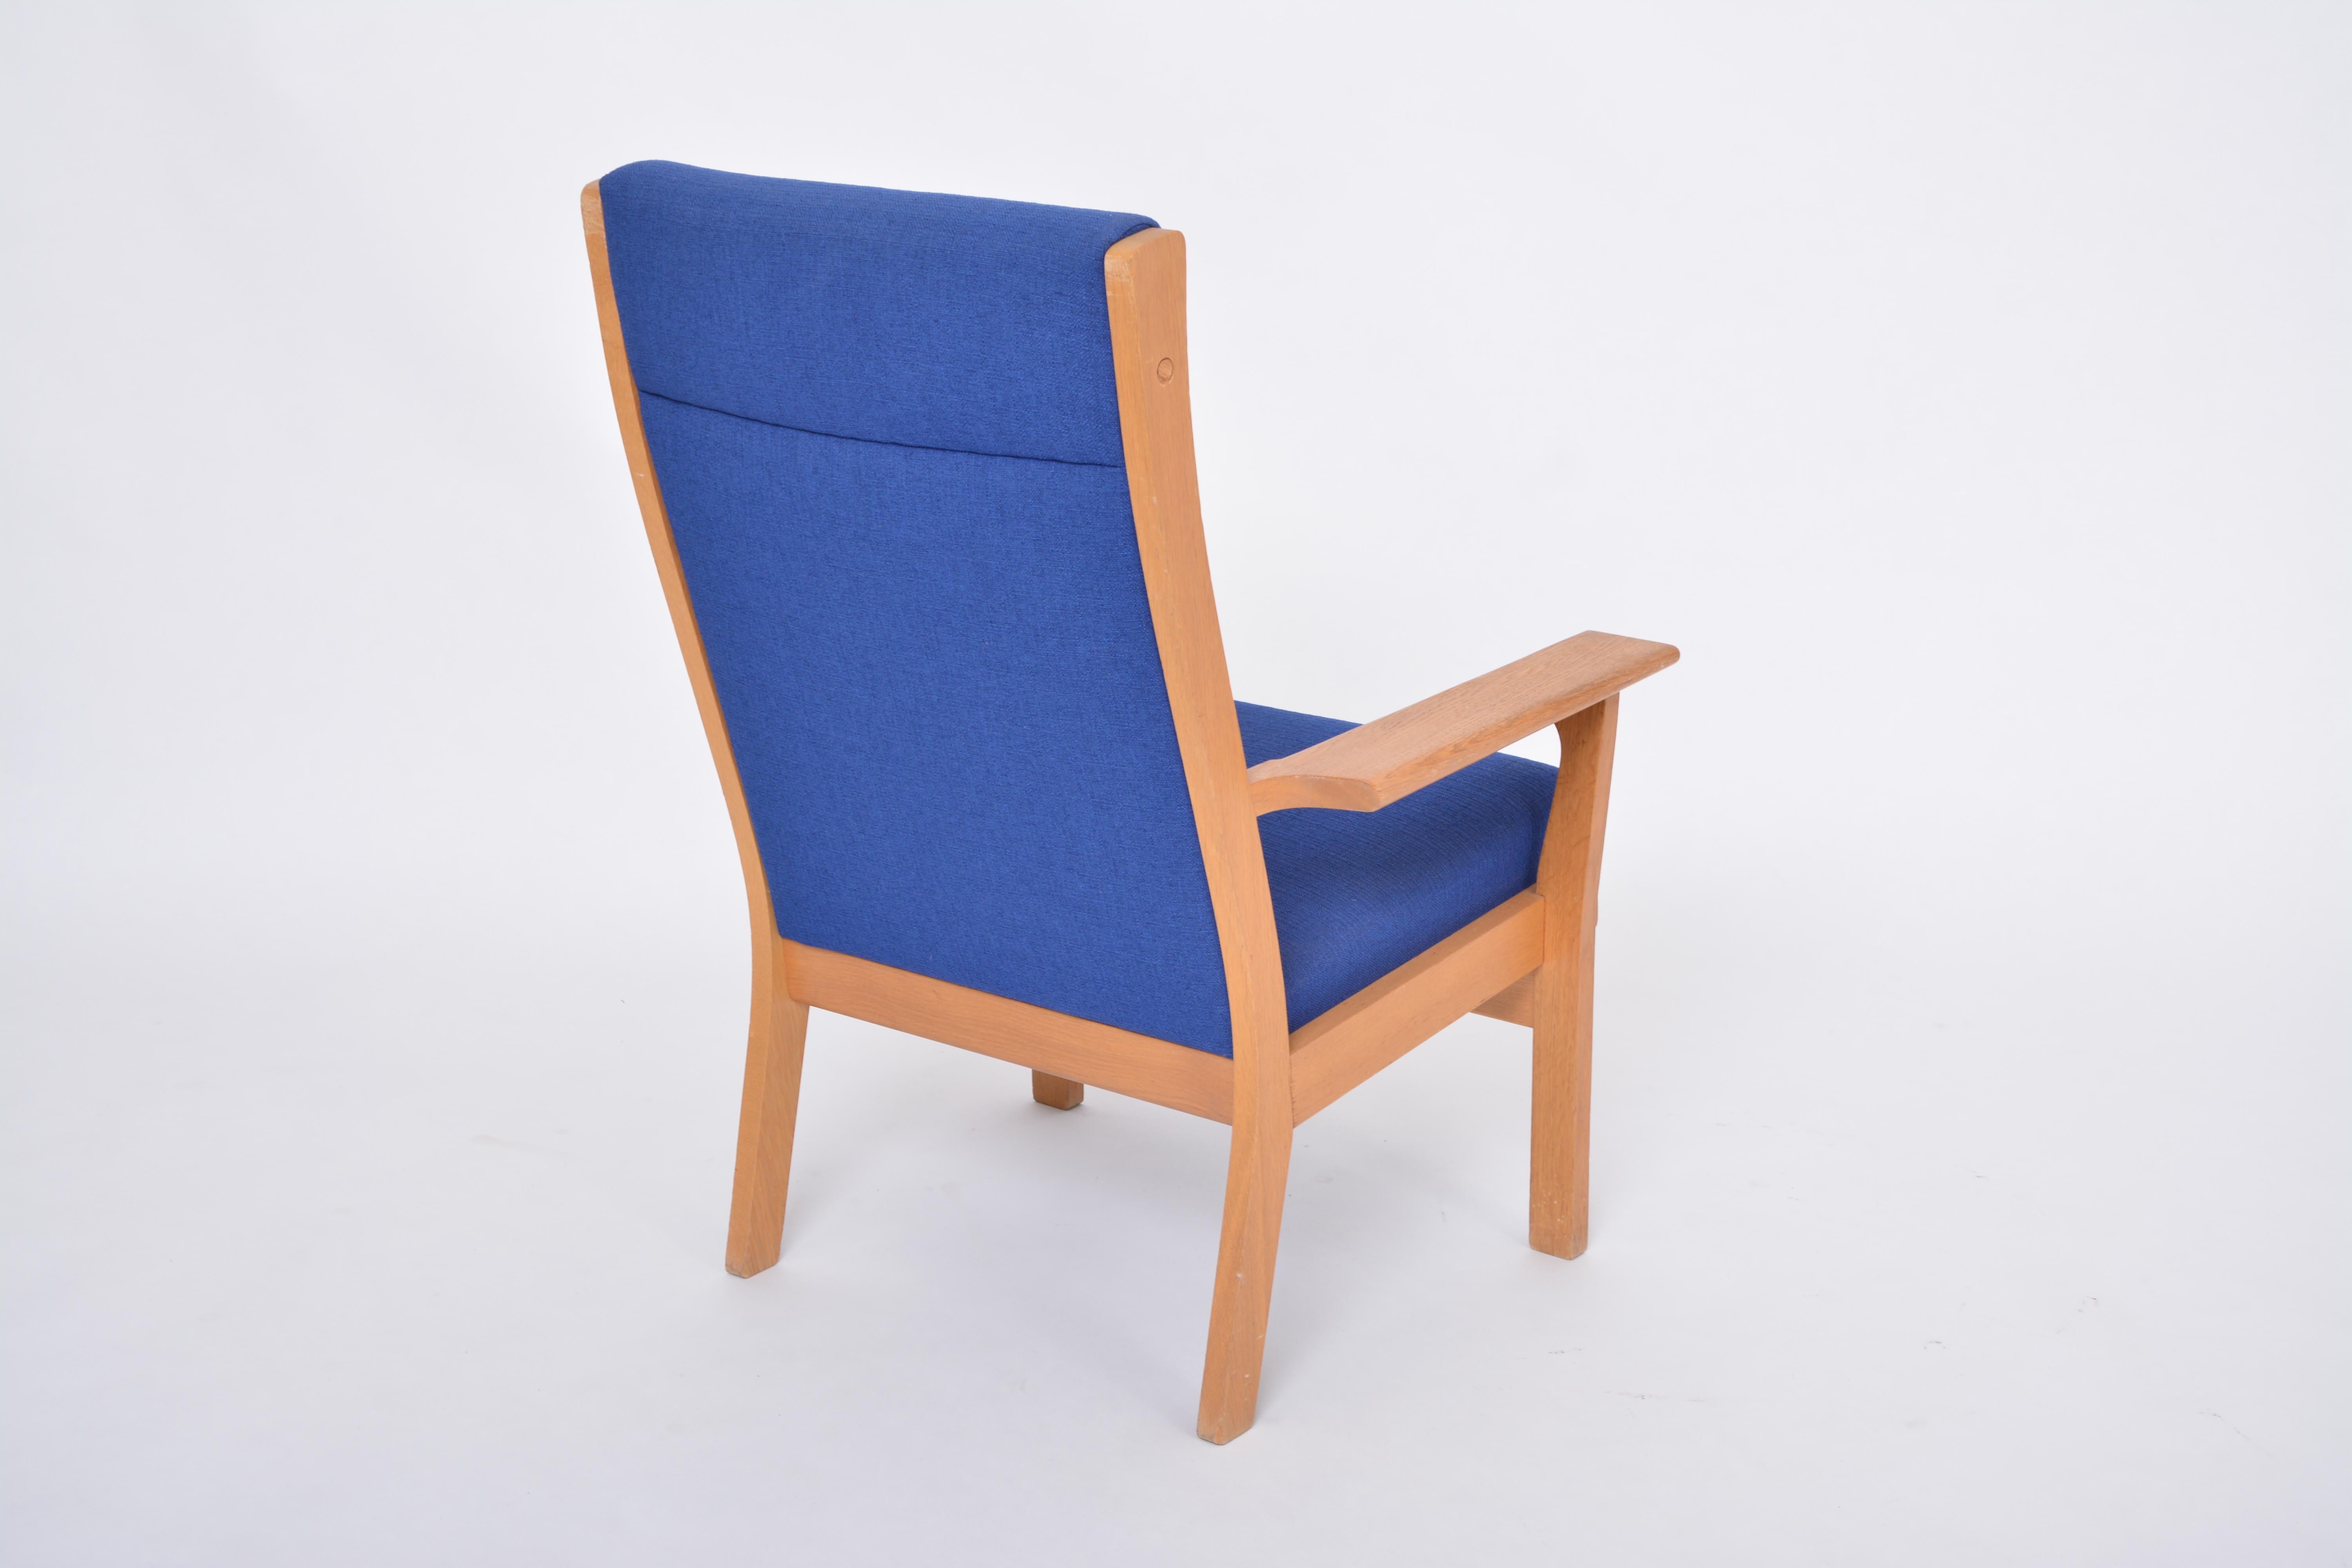 Reupholstered Danish Mid-Century Modern GE 181 a Chair by Hans Wegner for GETAMA For Sale 2